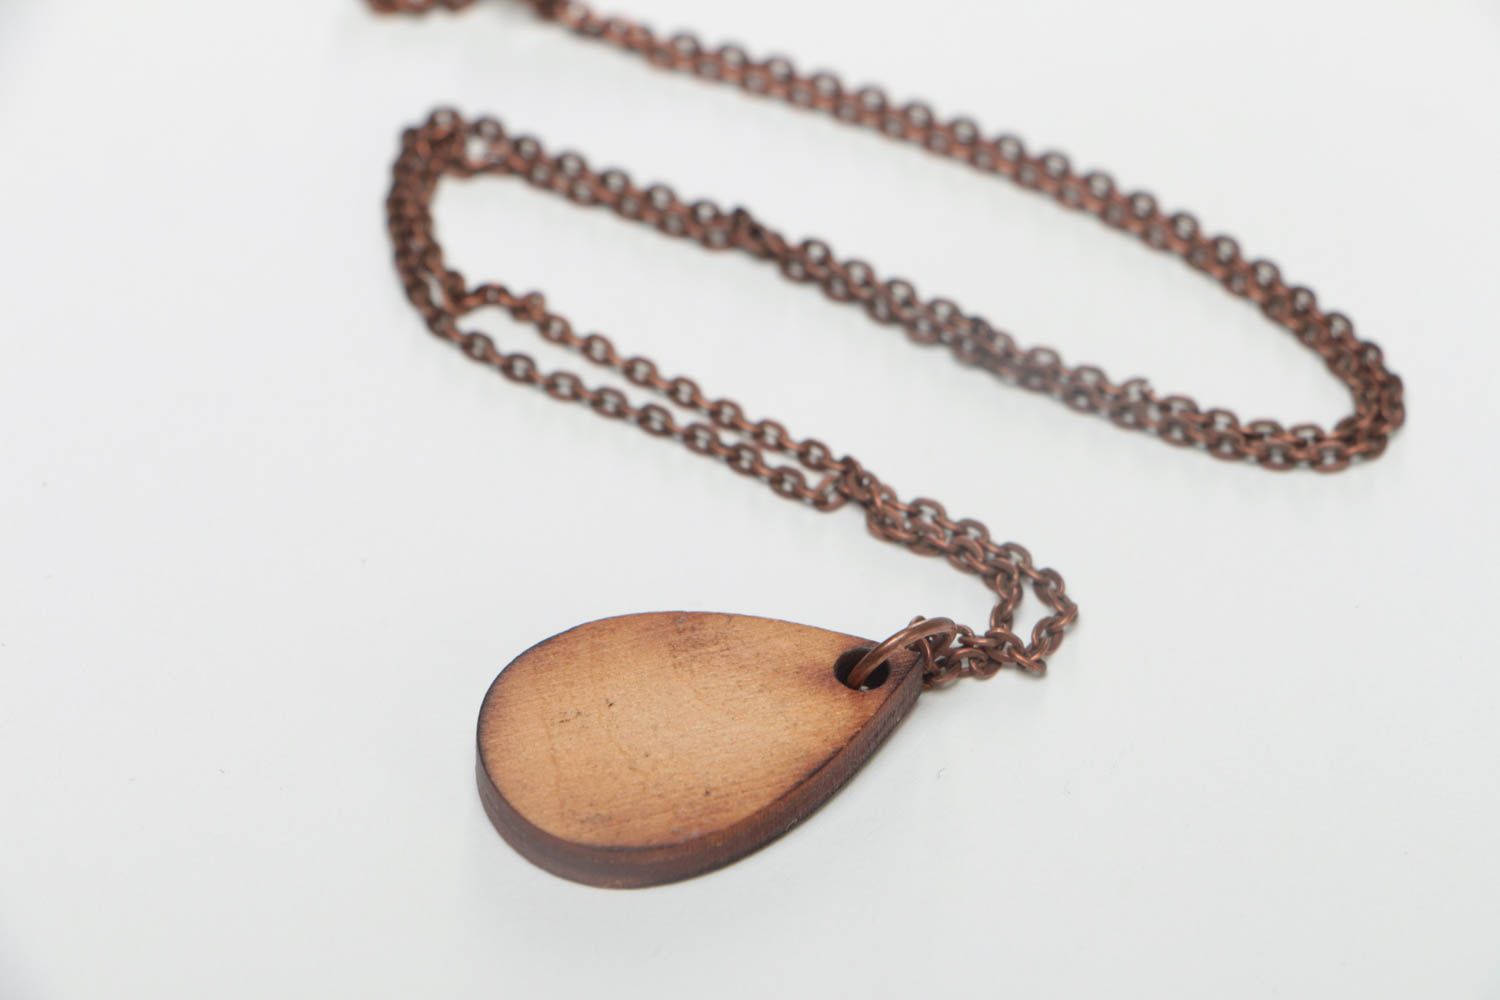 Homemade jewelry pendant necklace wooden jewelry designer accessories cool gifts photo 4